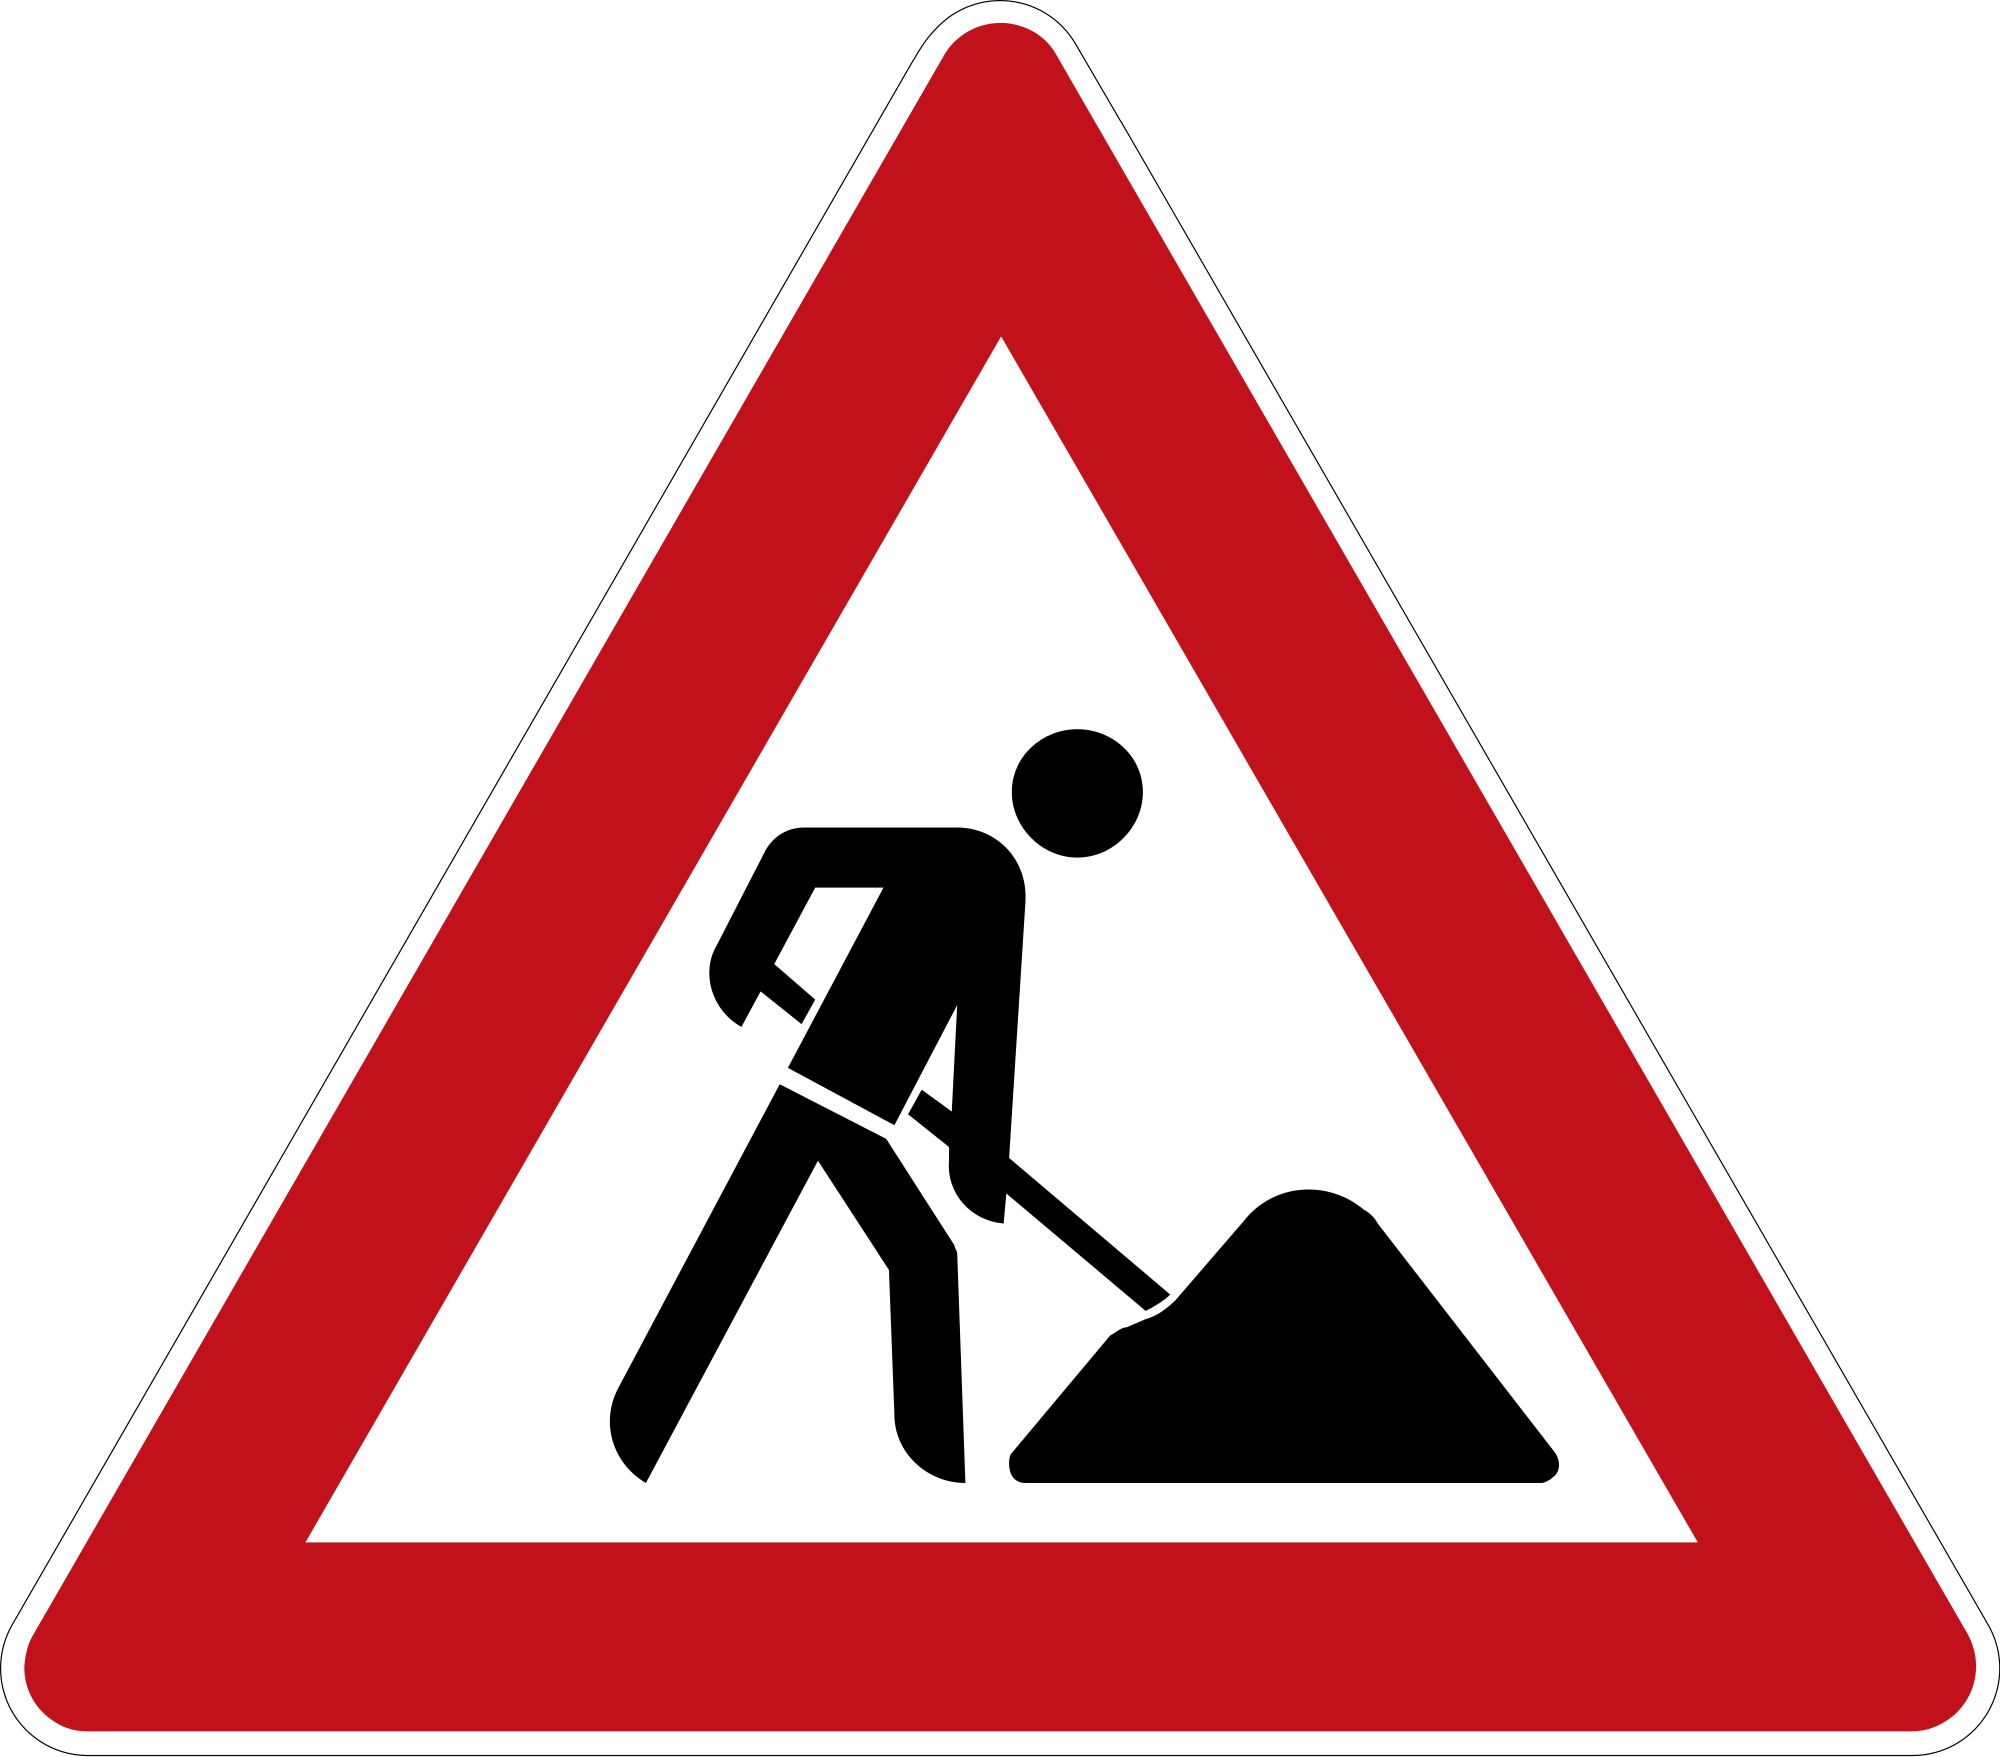 Road Work Companies | Tips for When Road Construction Affects Your Business